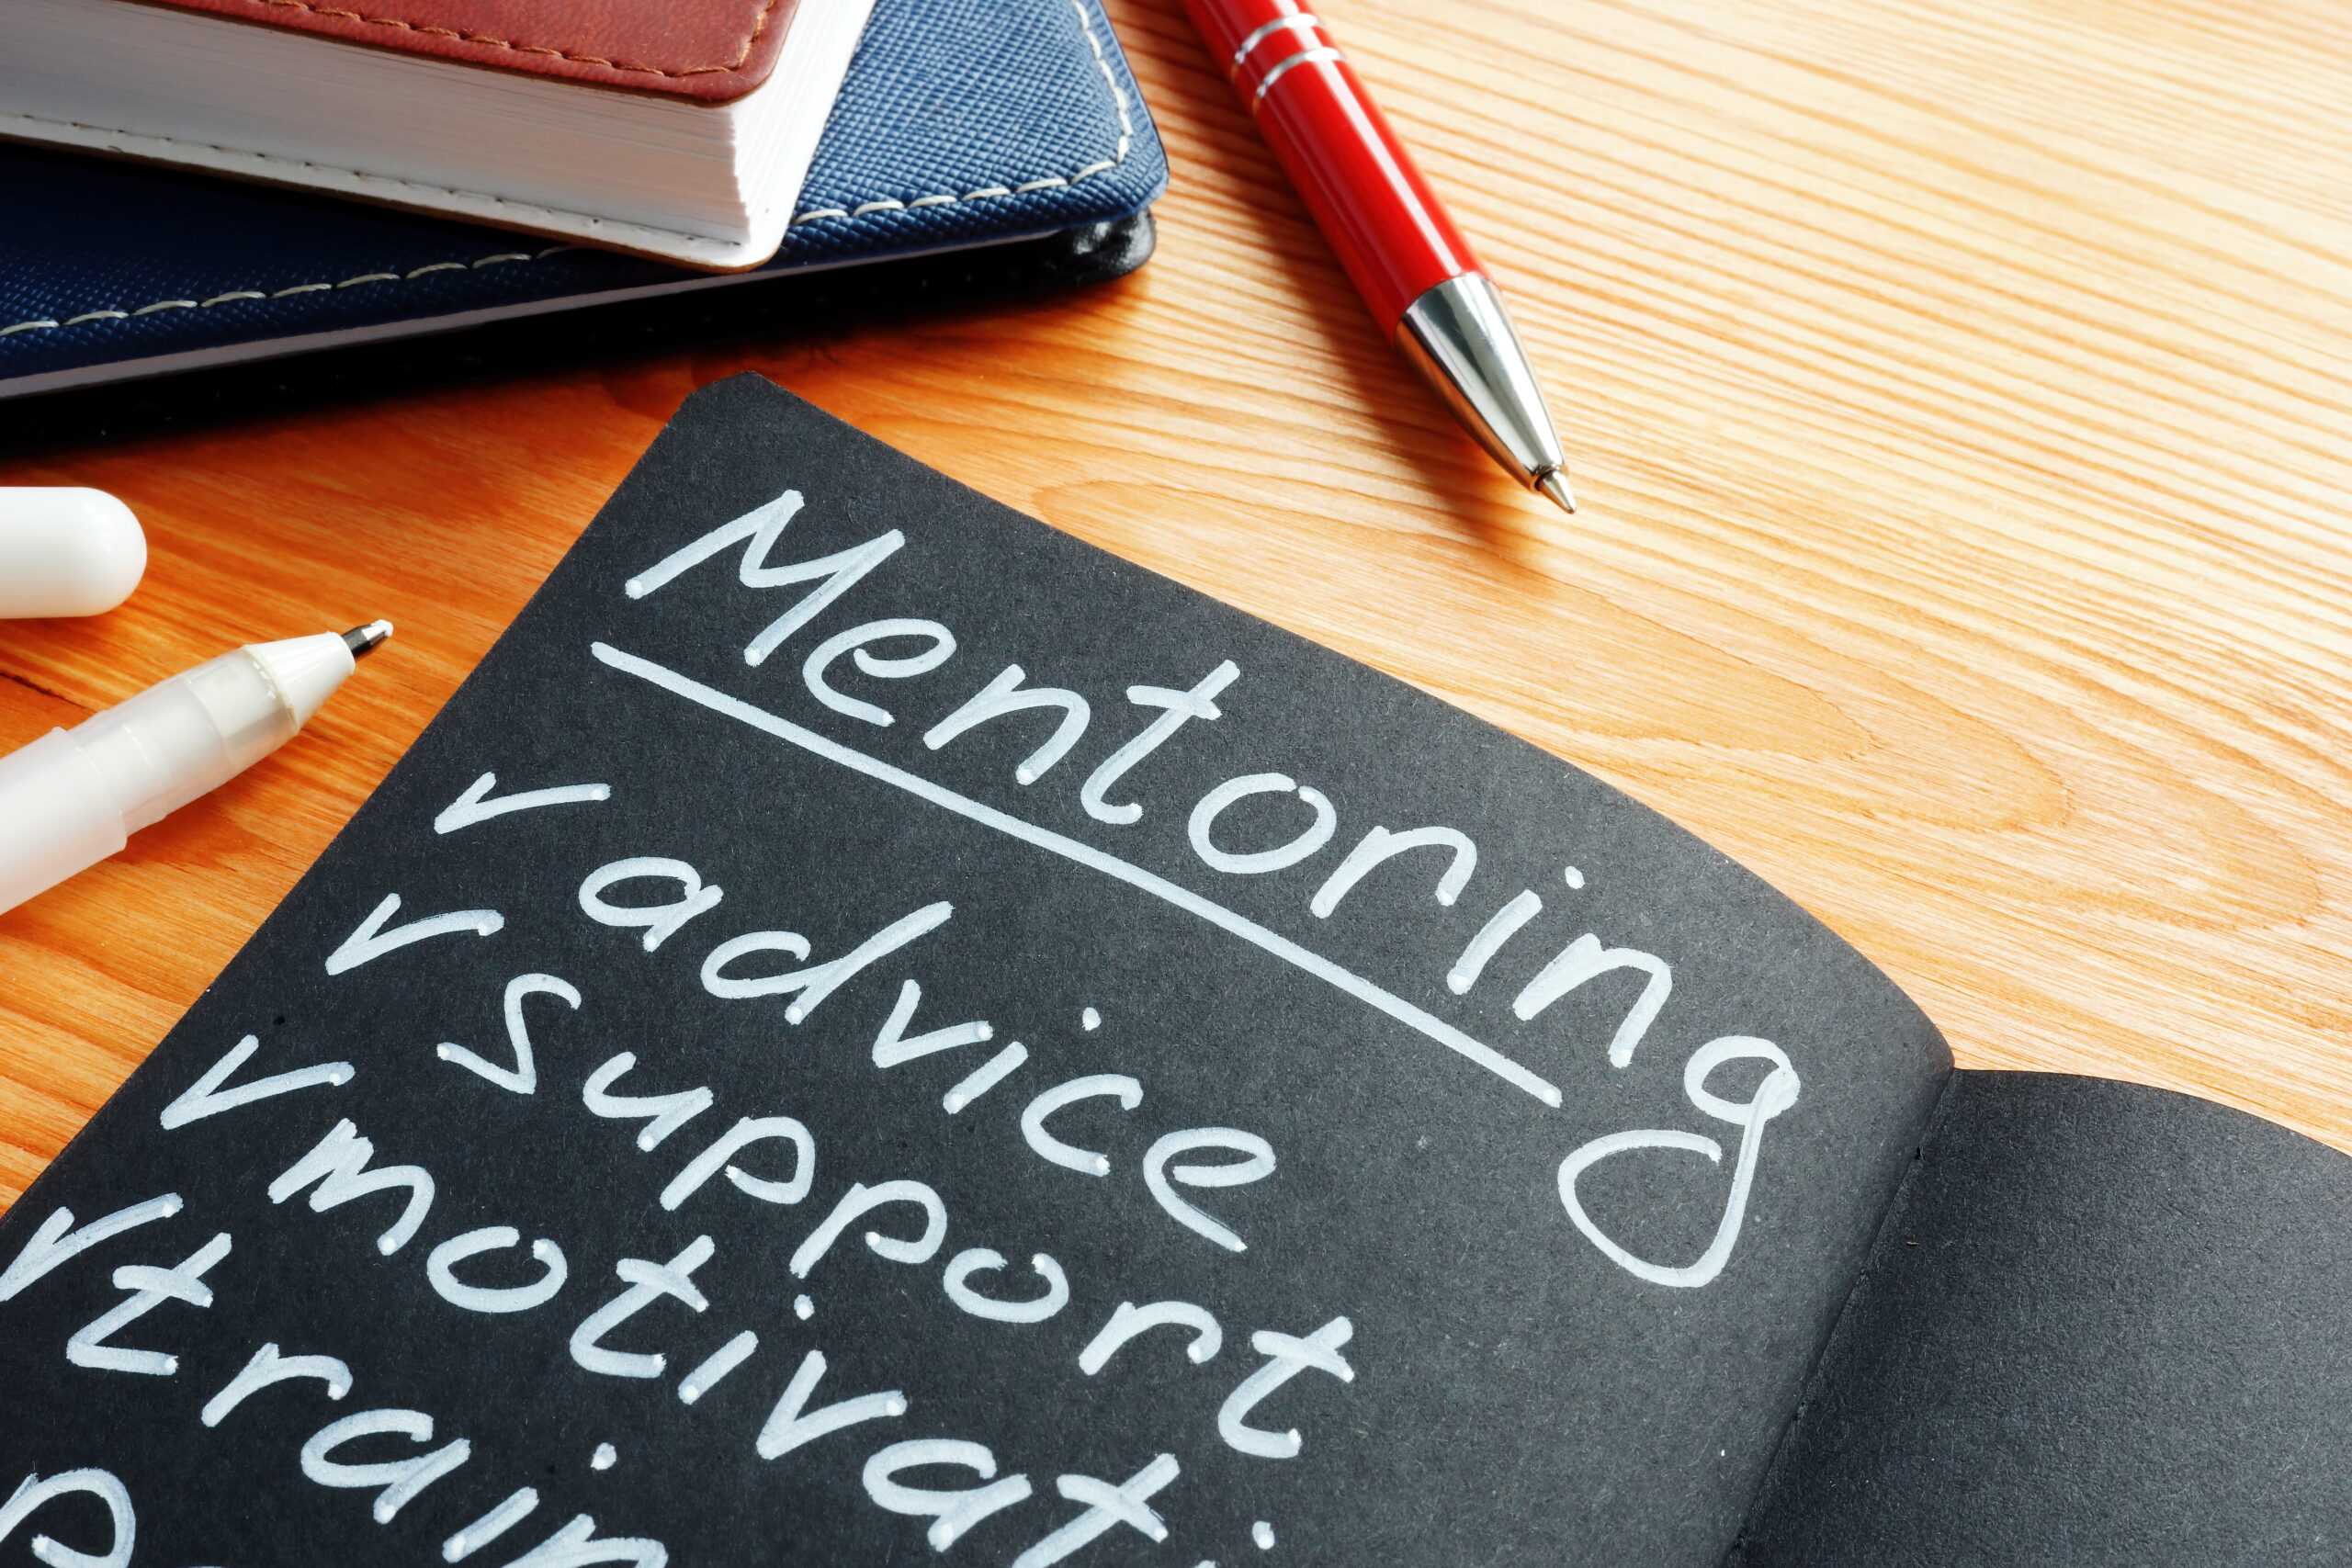 Benefit from a Mentor (Or Be One!)